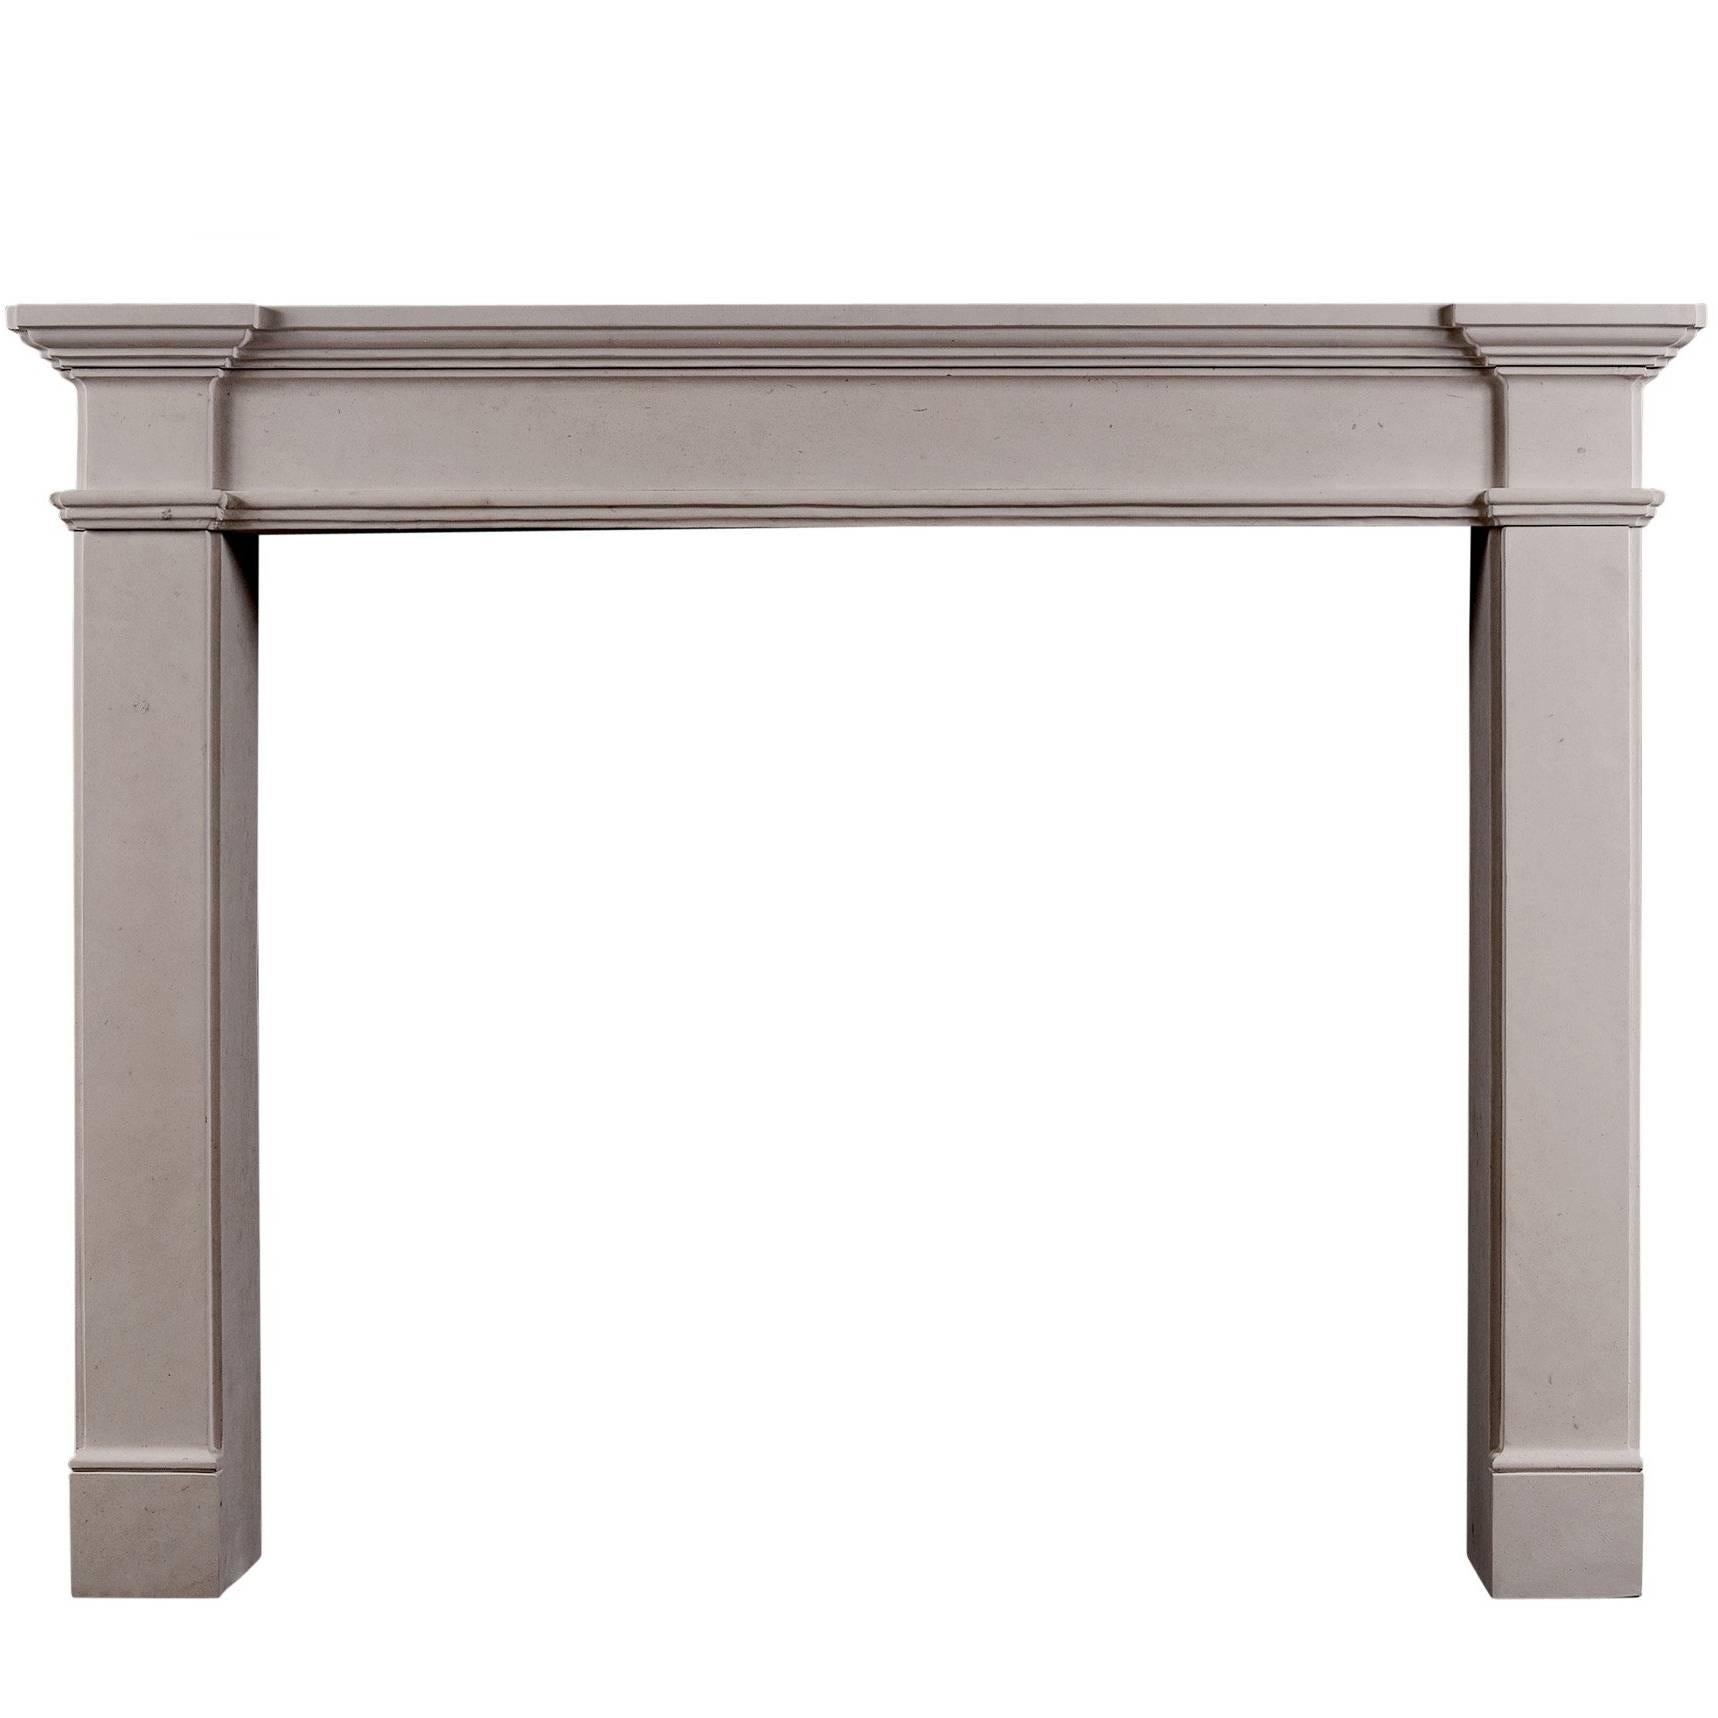 Architectural French Limestone Fireplace For Sale